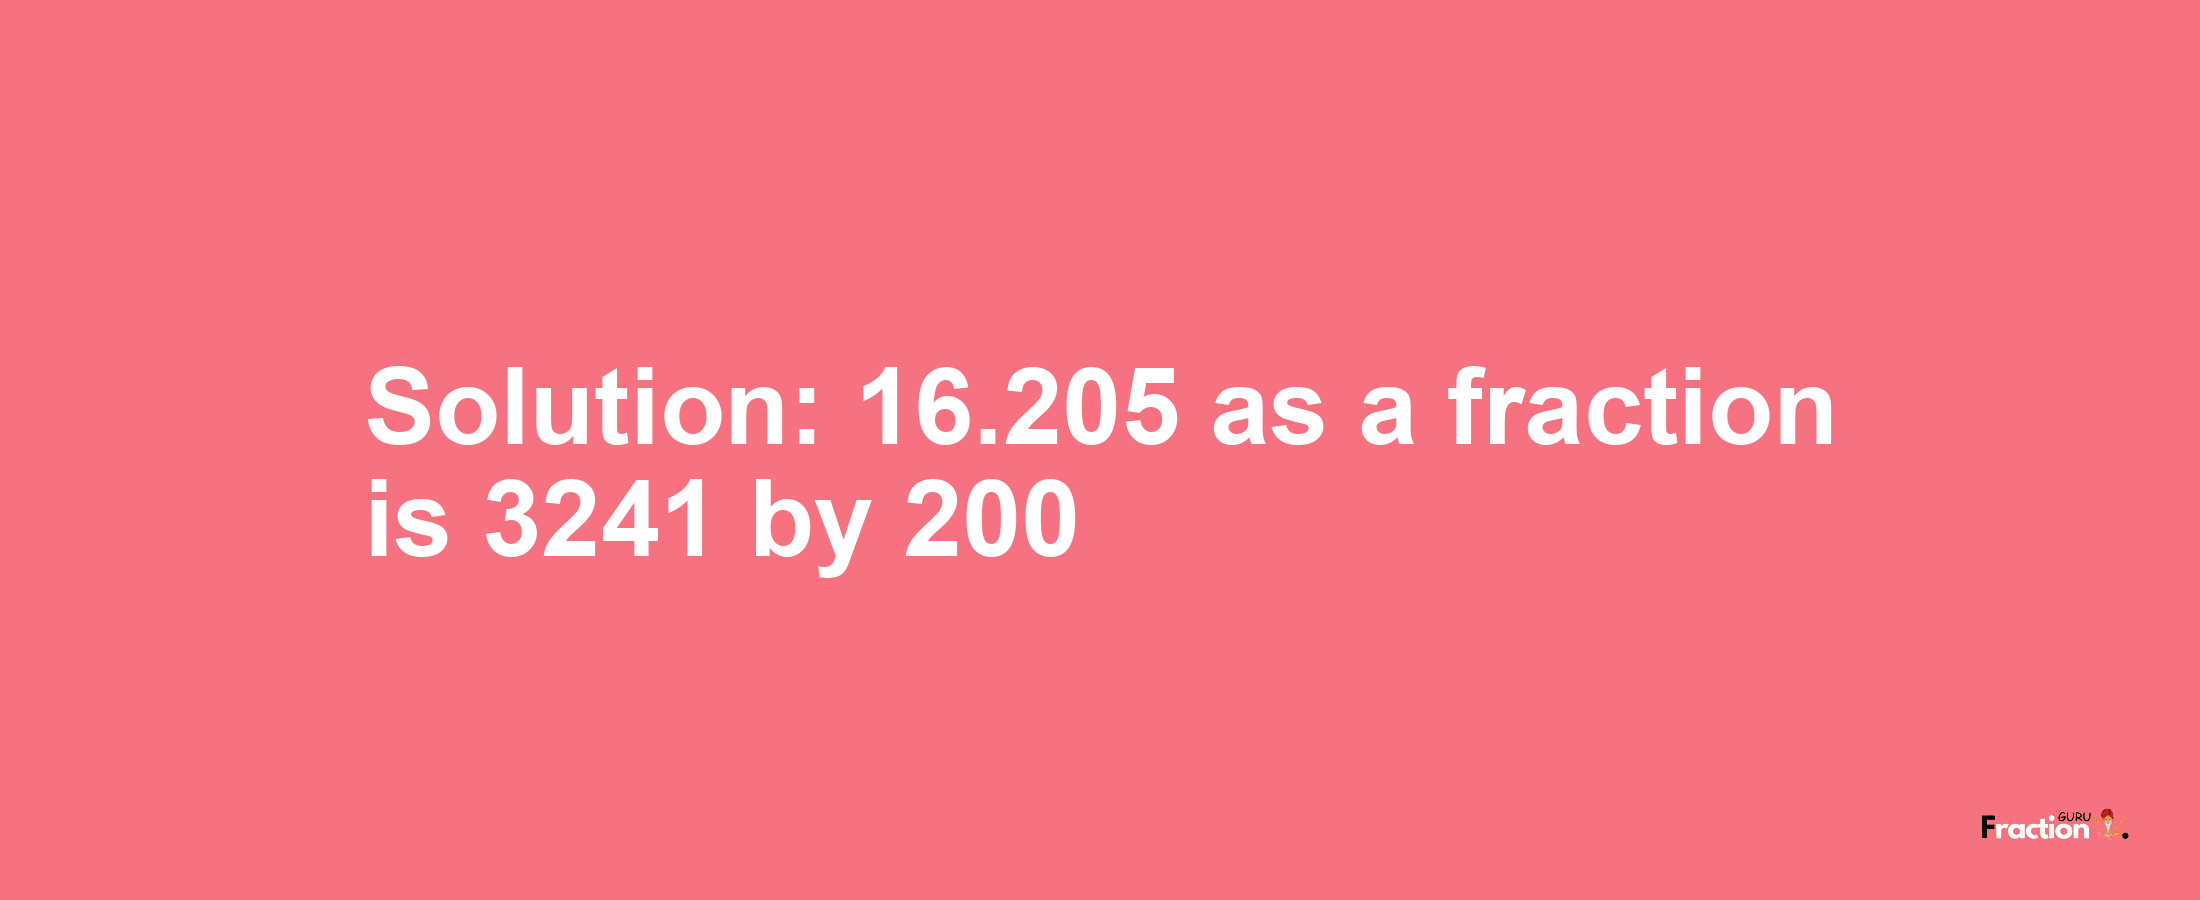 Solution:16.205 as a fraction is 3241/200